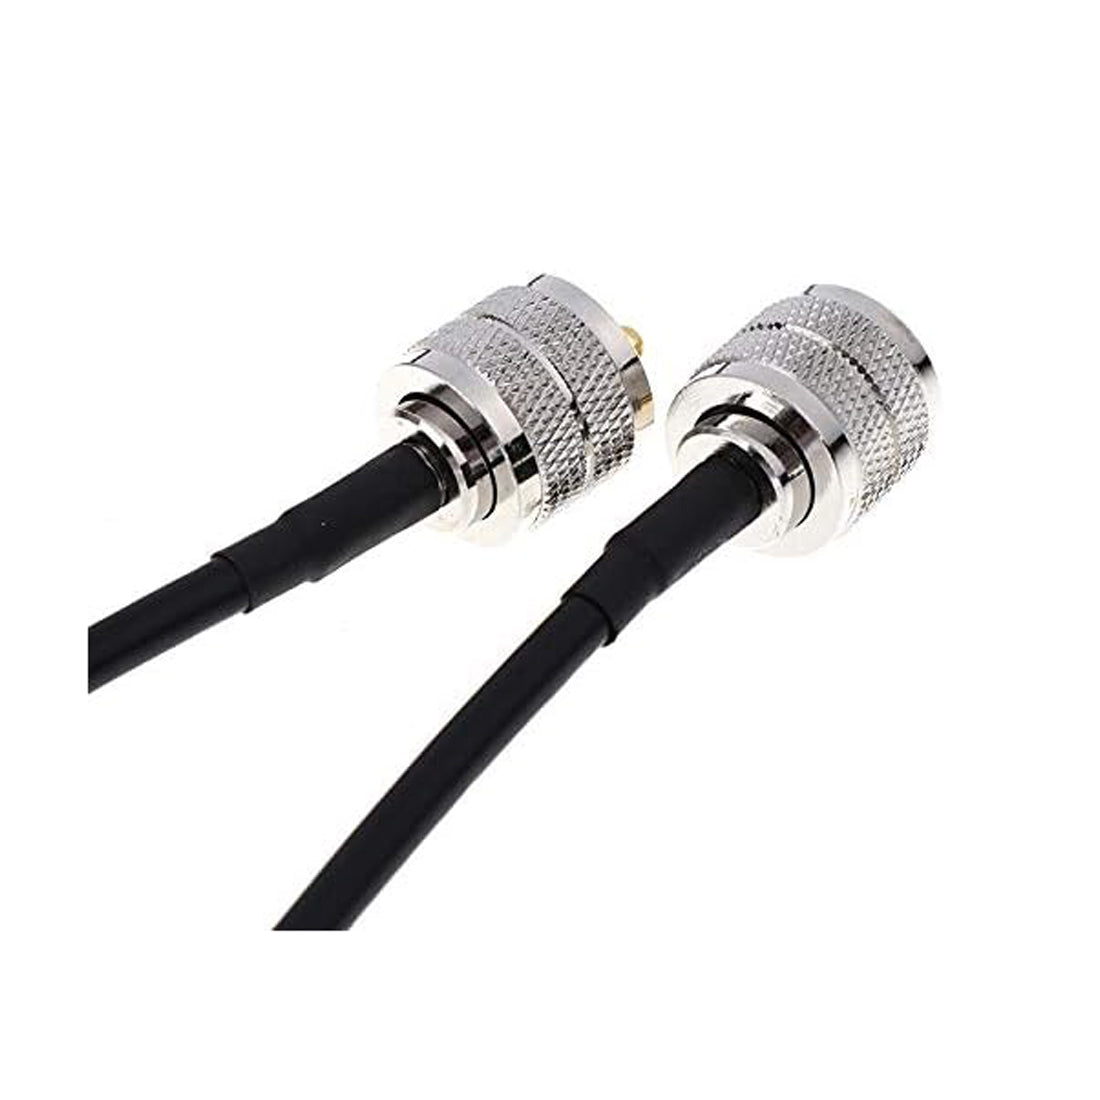 Midland Connecting cable for CB transceivers Midland R 90-58-U T193, transceiver cable 90 cm